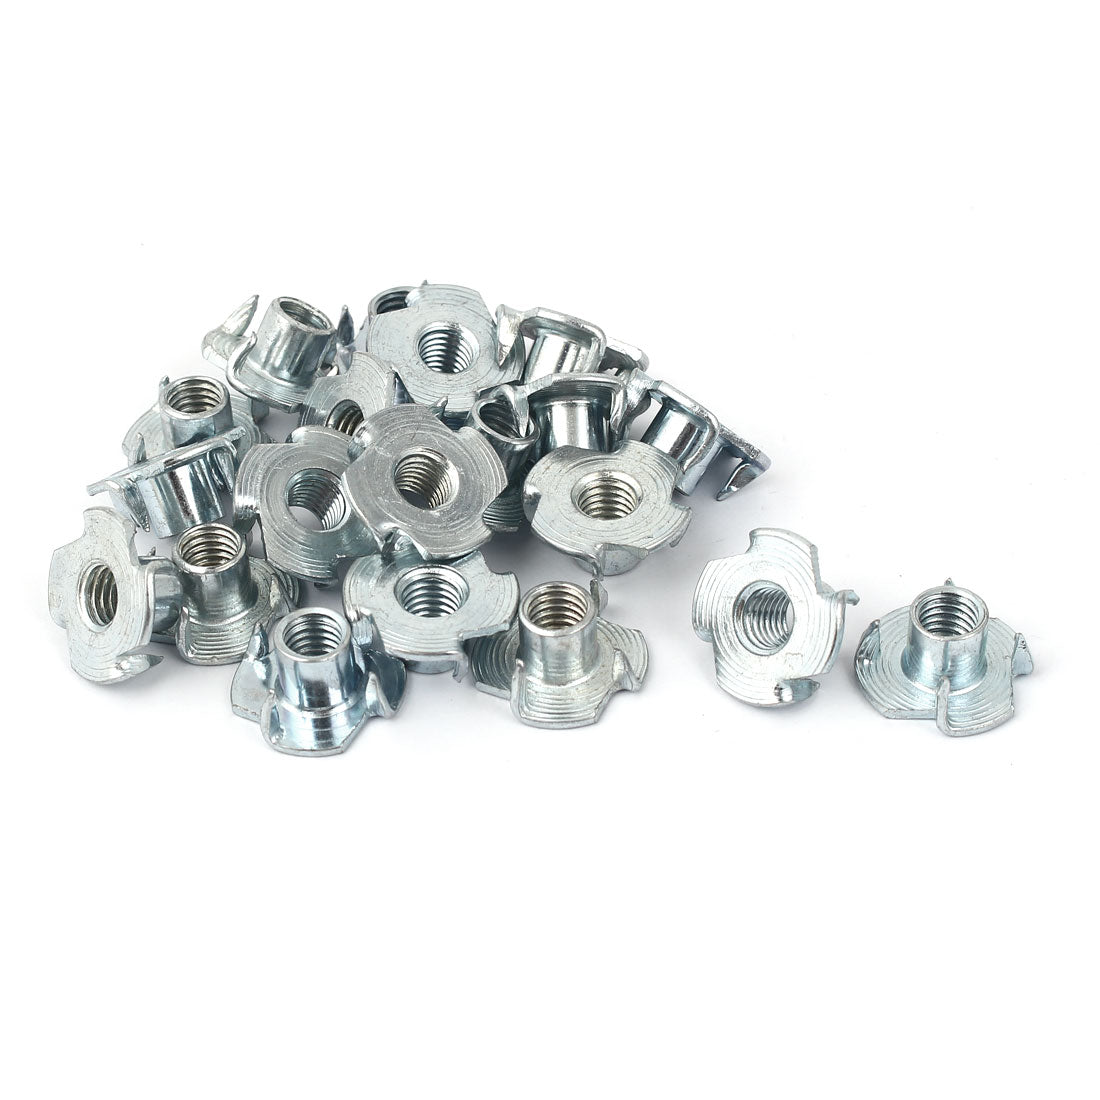 uxcell Uxcell 20 Pcs M8 Metric 4 Prongs Pronged Tee Nuts for Wood Furniture